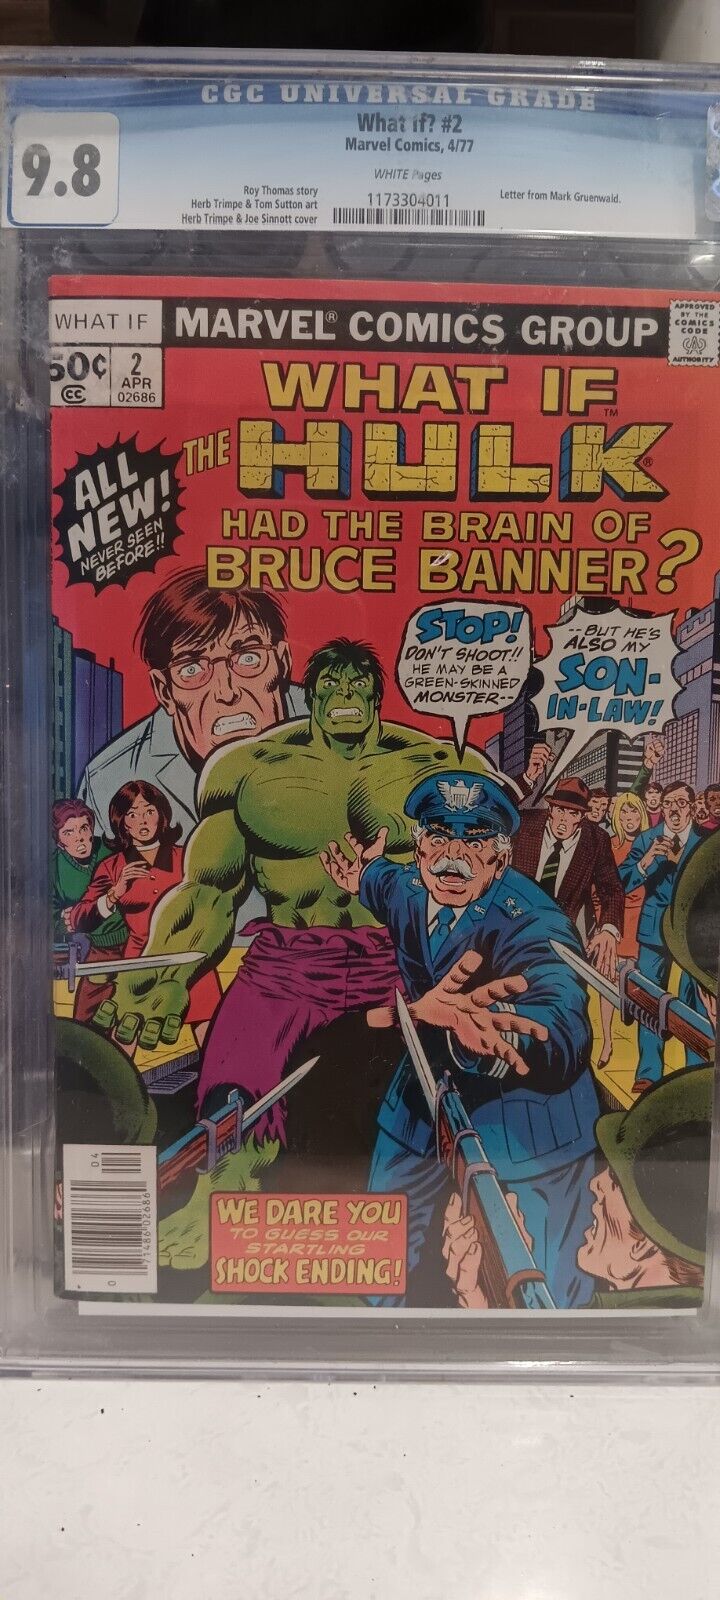 What If? #2 CGC 9.8 1977 What If The Hulk had the Brain of Bruce Banner? A337